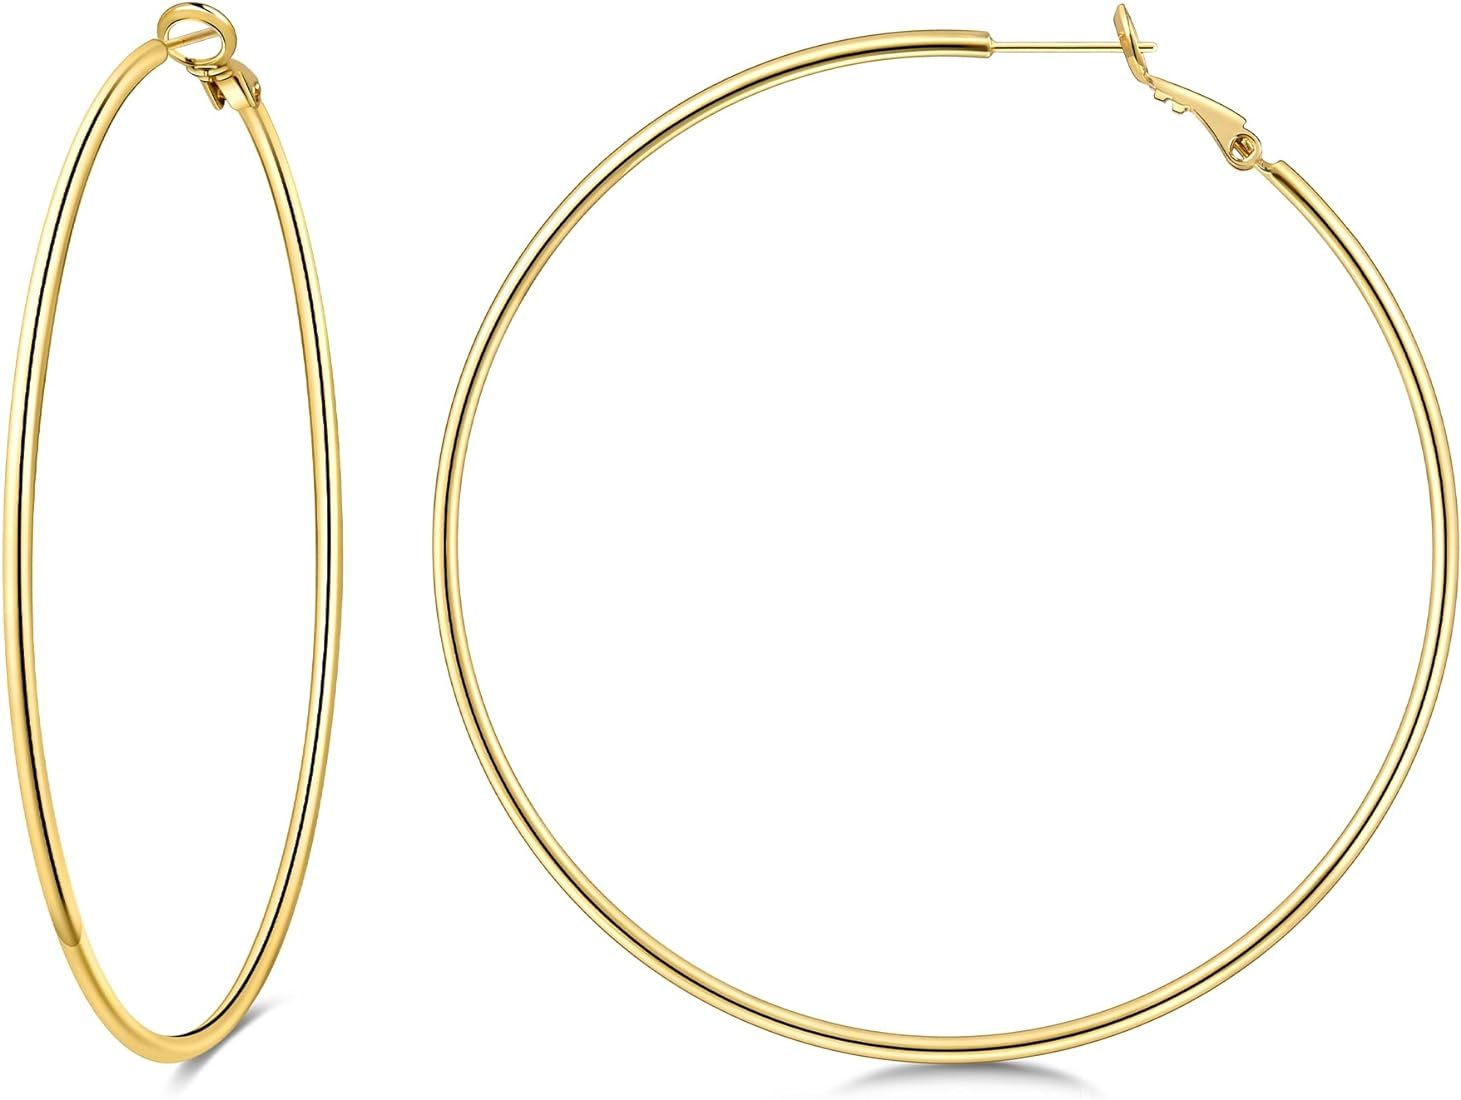 Gacimy Gold Hoop Earrings for Women 14K Real Gold Plated, 925 Sterling Silver Post Gold hoops for Wo | Amazon (US)